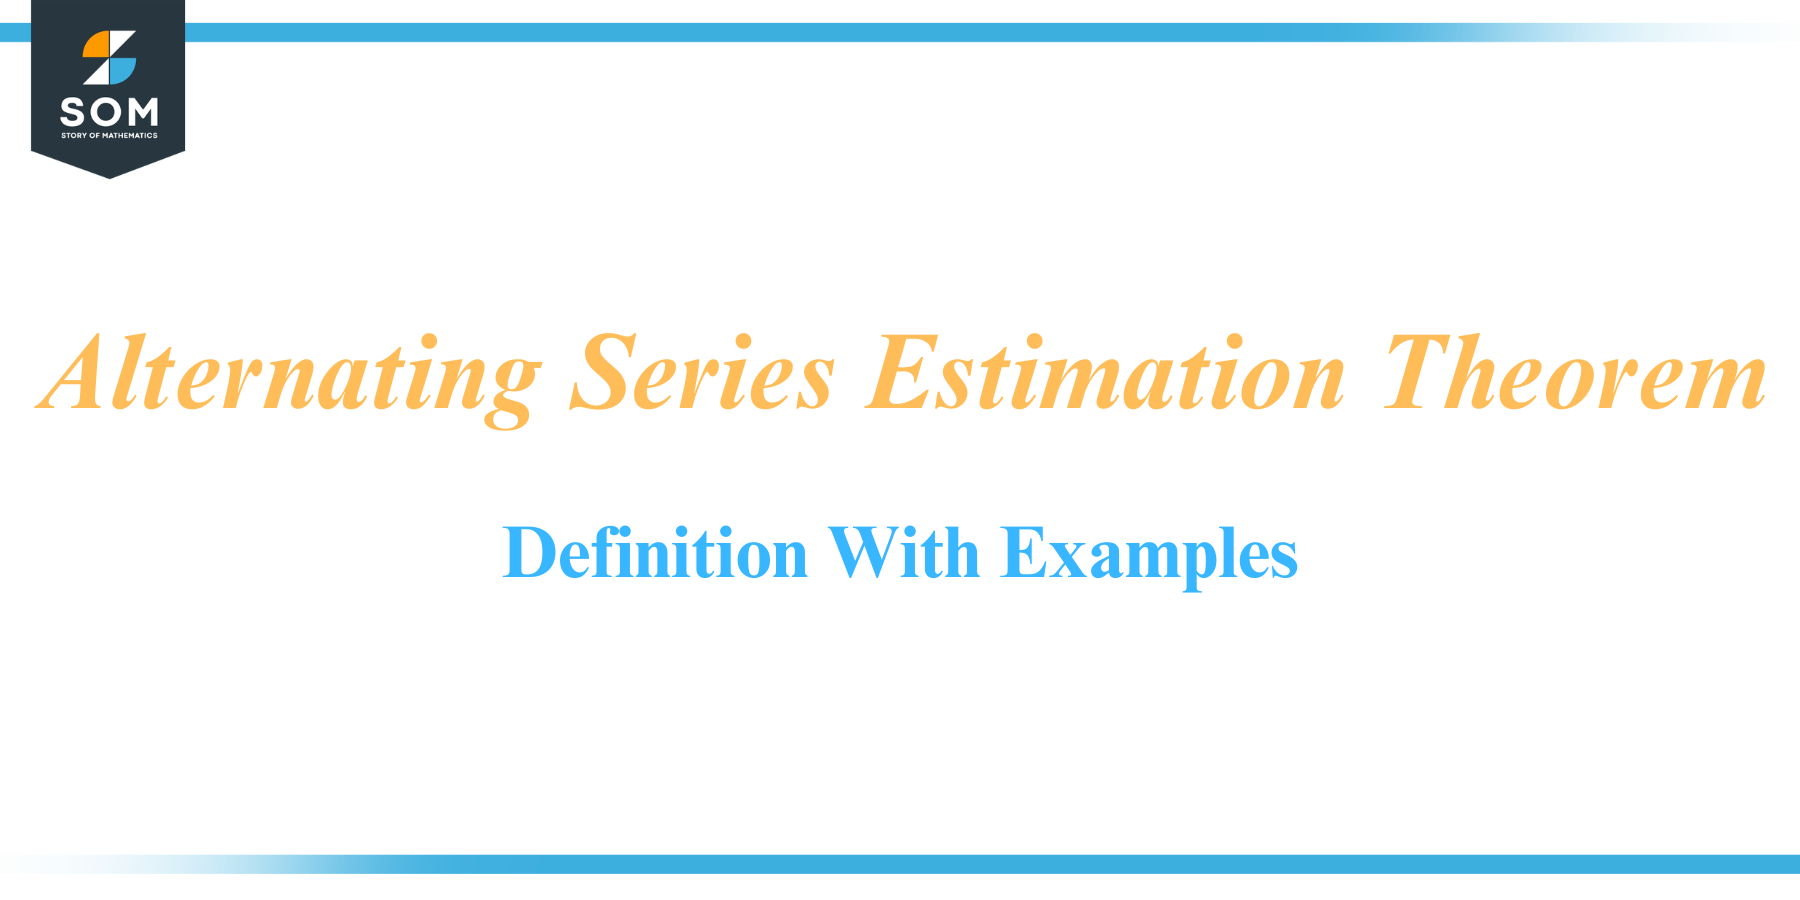 Alternating Series Estimation Theorem Definition With